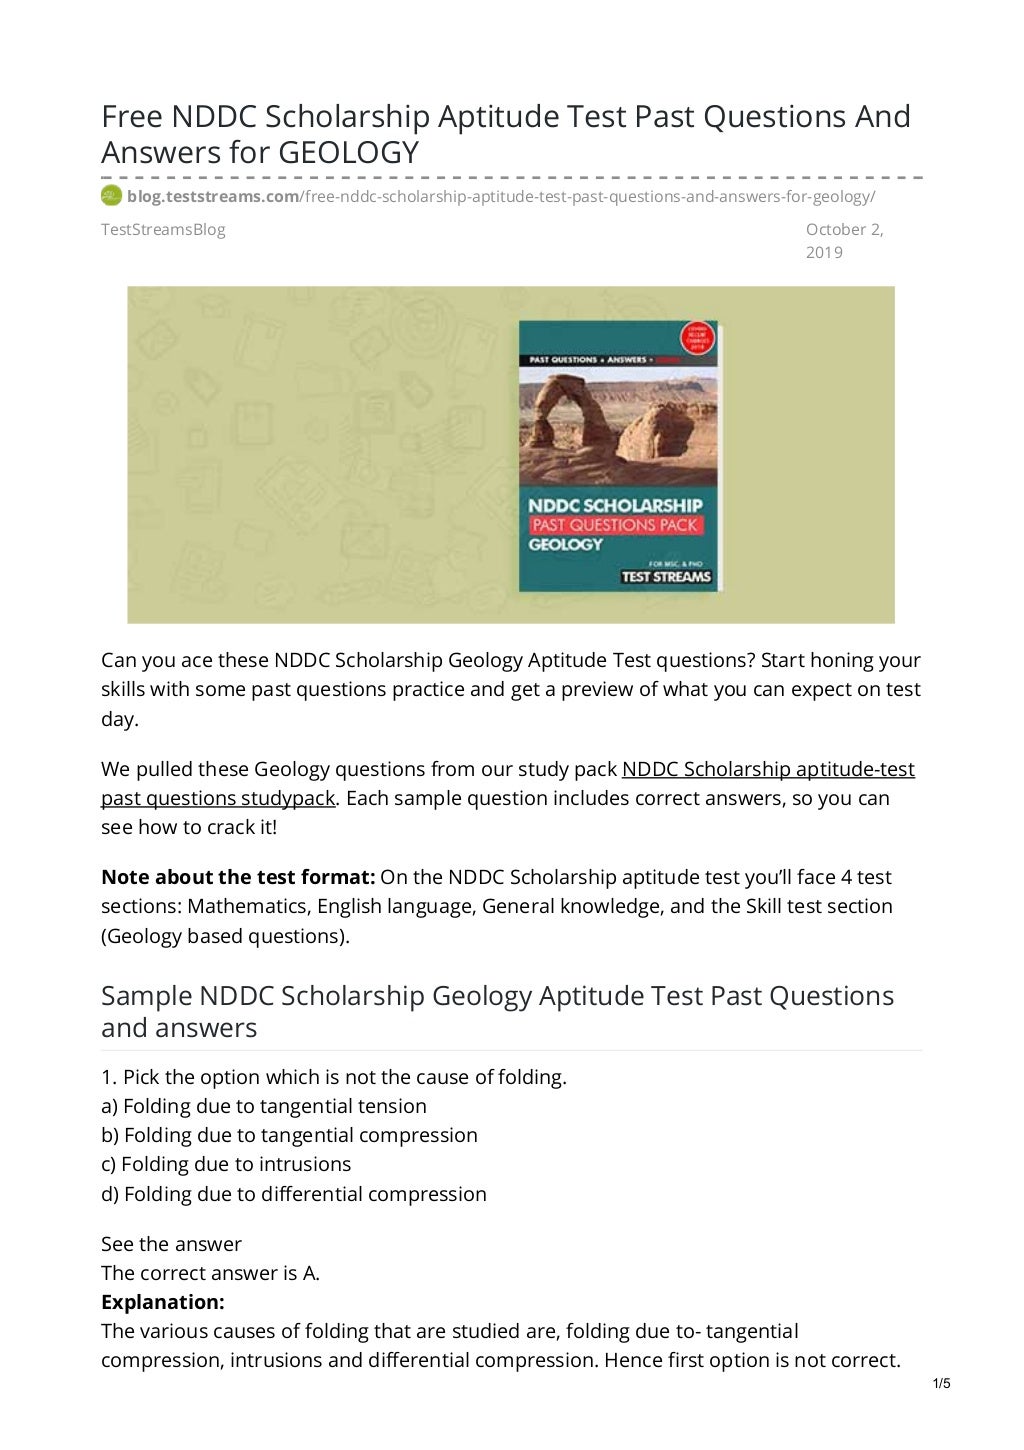 Free Nddc Scholarship Aptitude Test Past Questions And Answers For G 